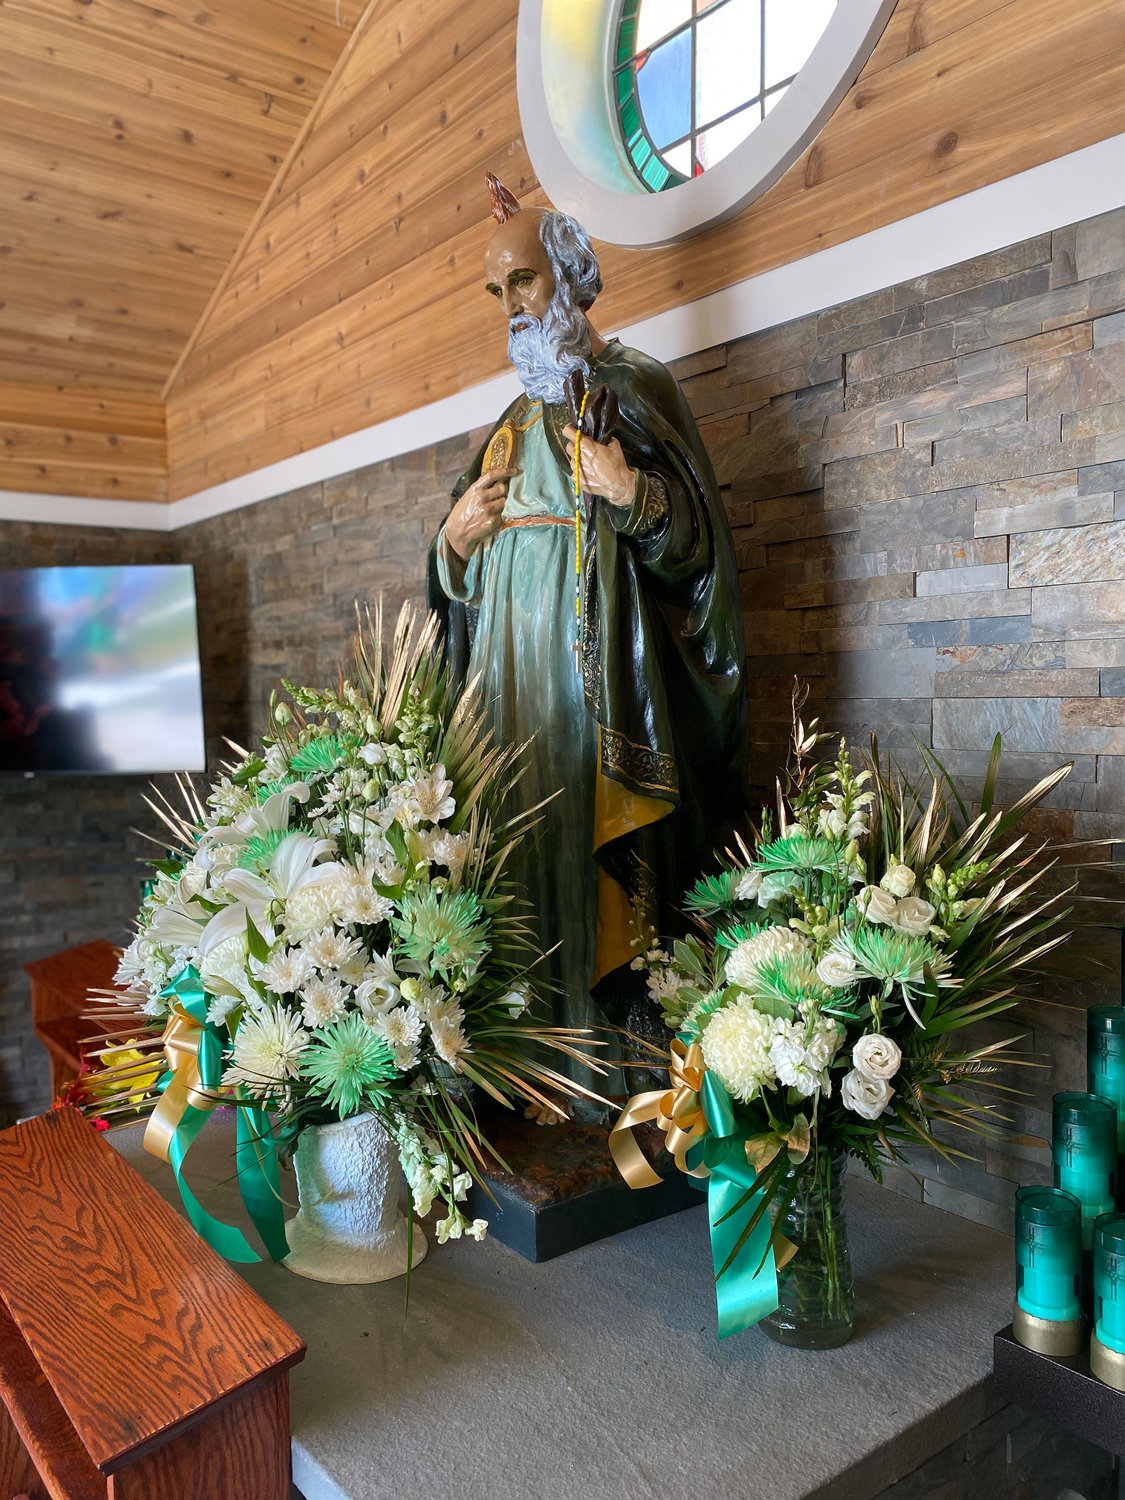 Inside the shrine, a statue of St. Jude stands over green and white flowers.